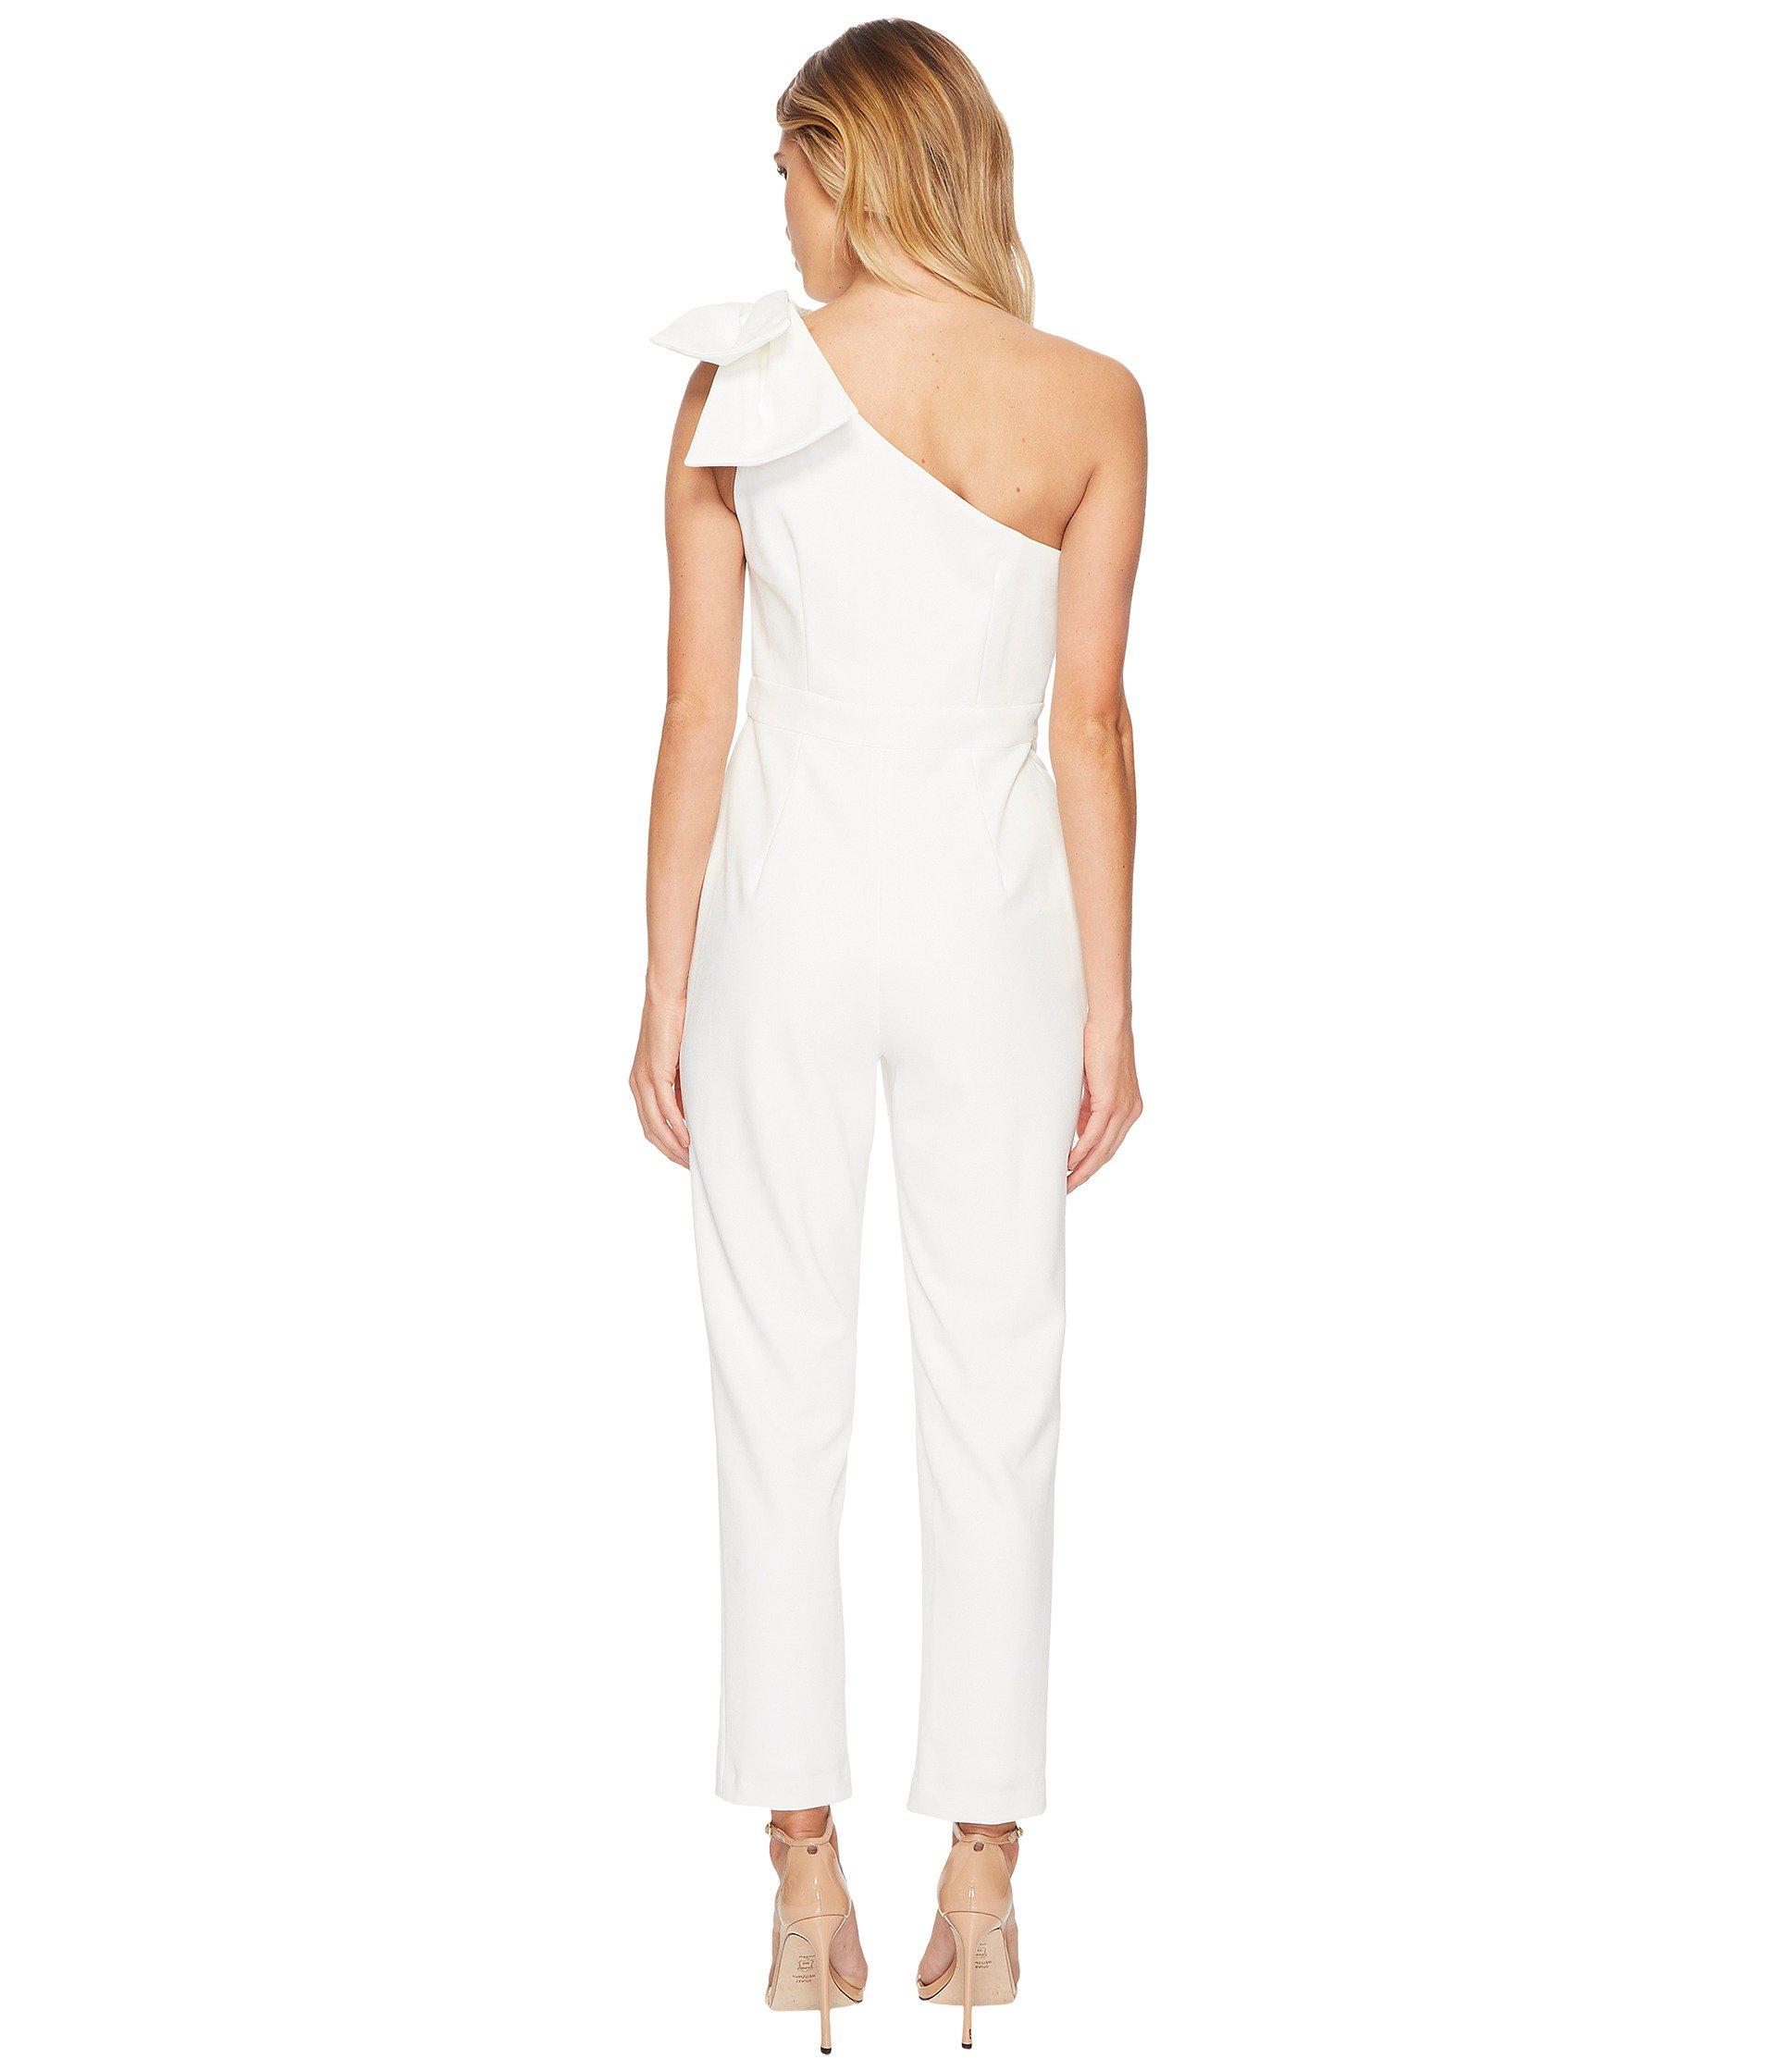 Adrianna Papell One Shoulder Jumpsuit With Bow Detail in White - Lyst